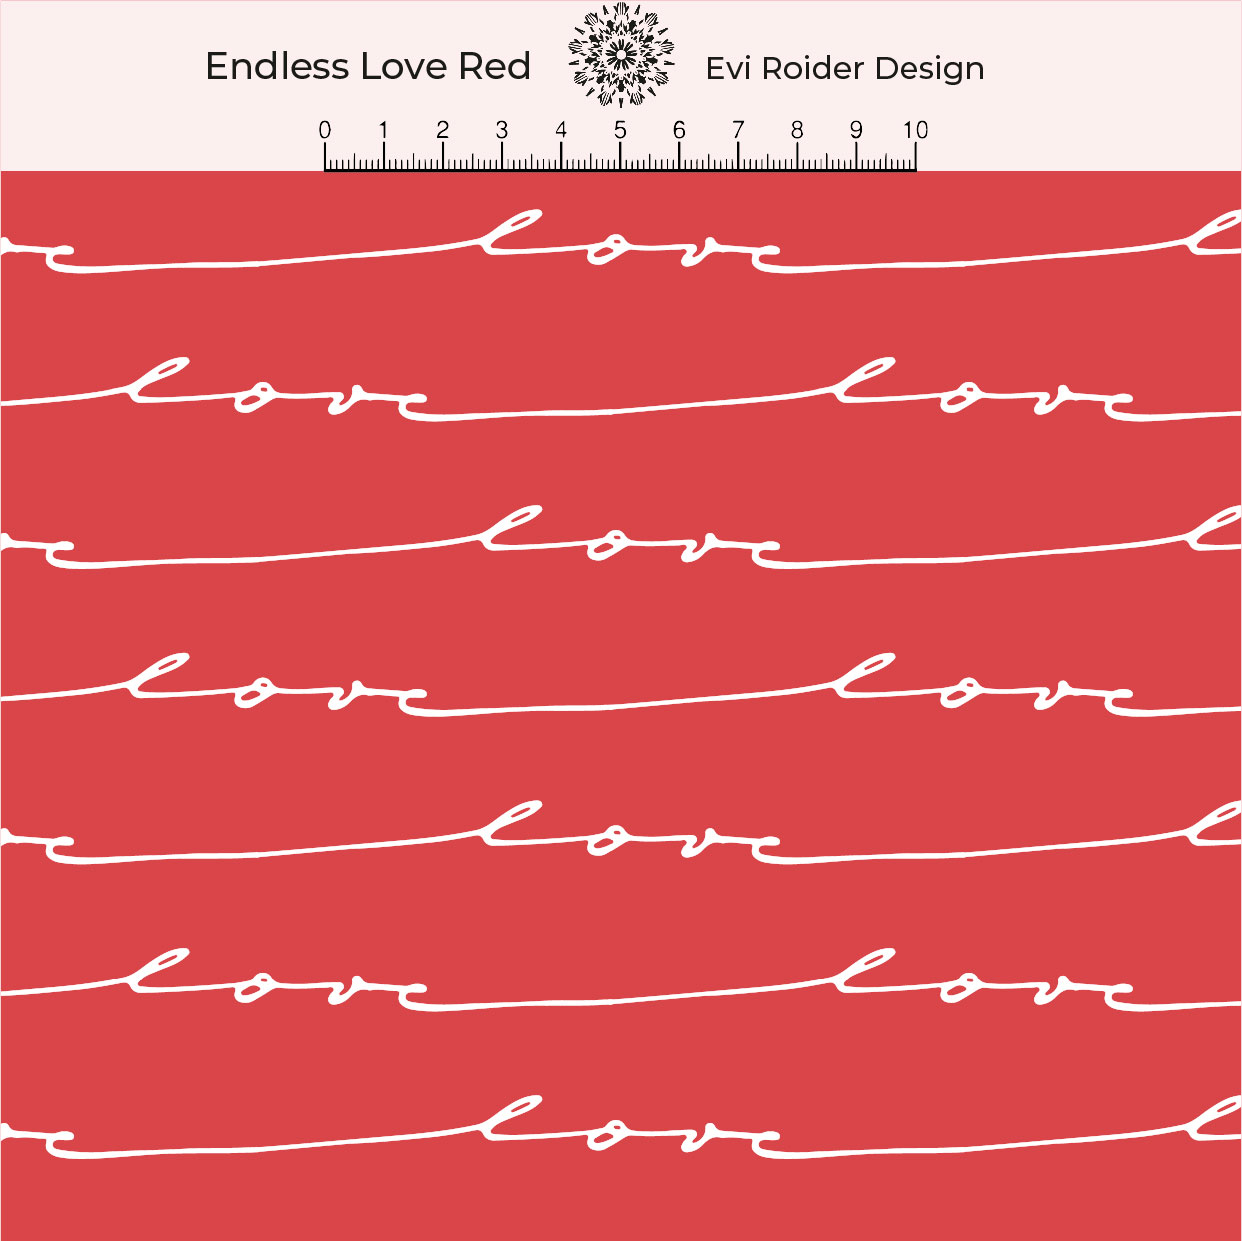 Endless Love Red